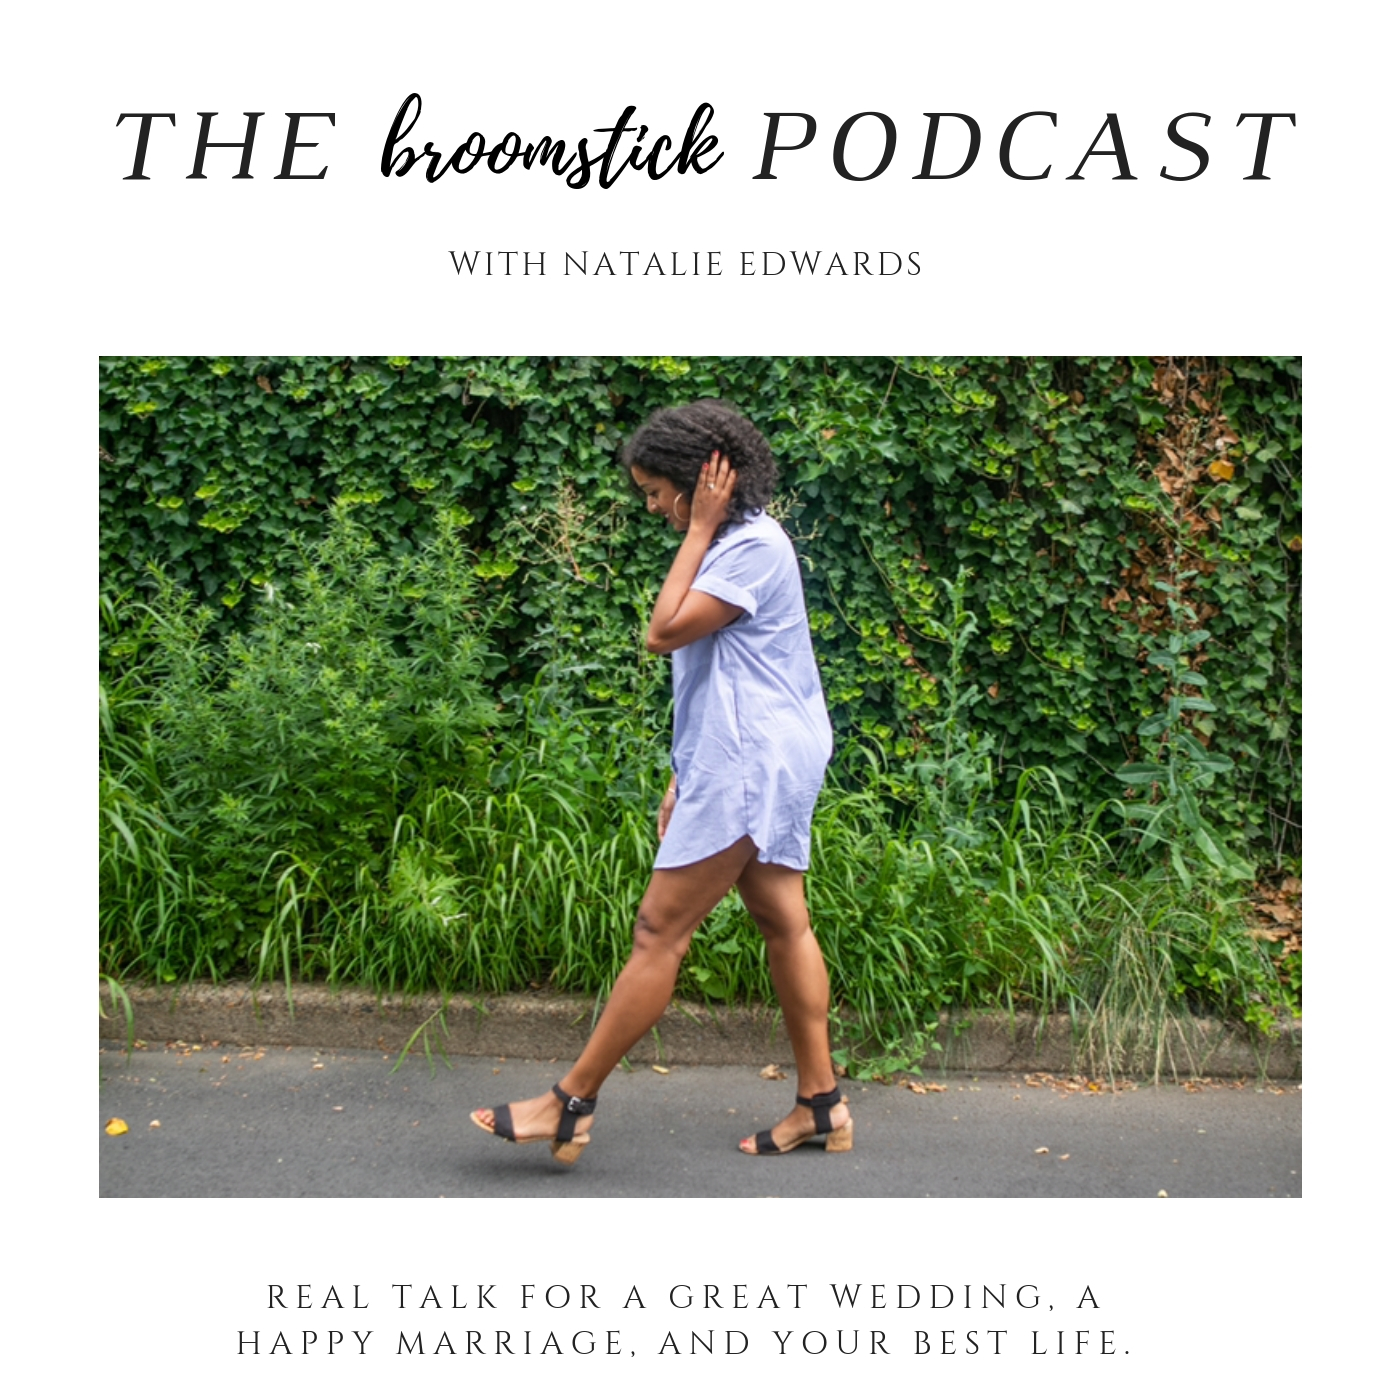 Black Women Podcasts for 2019 